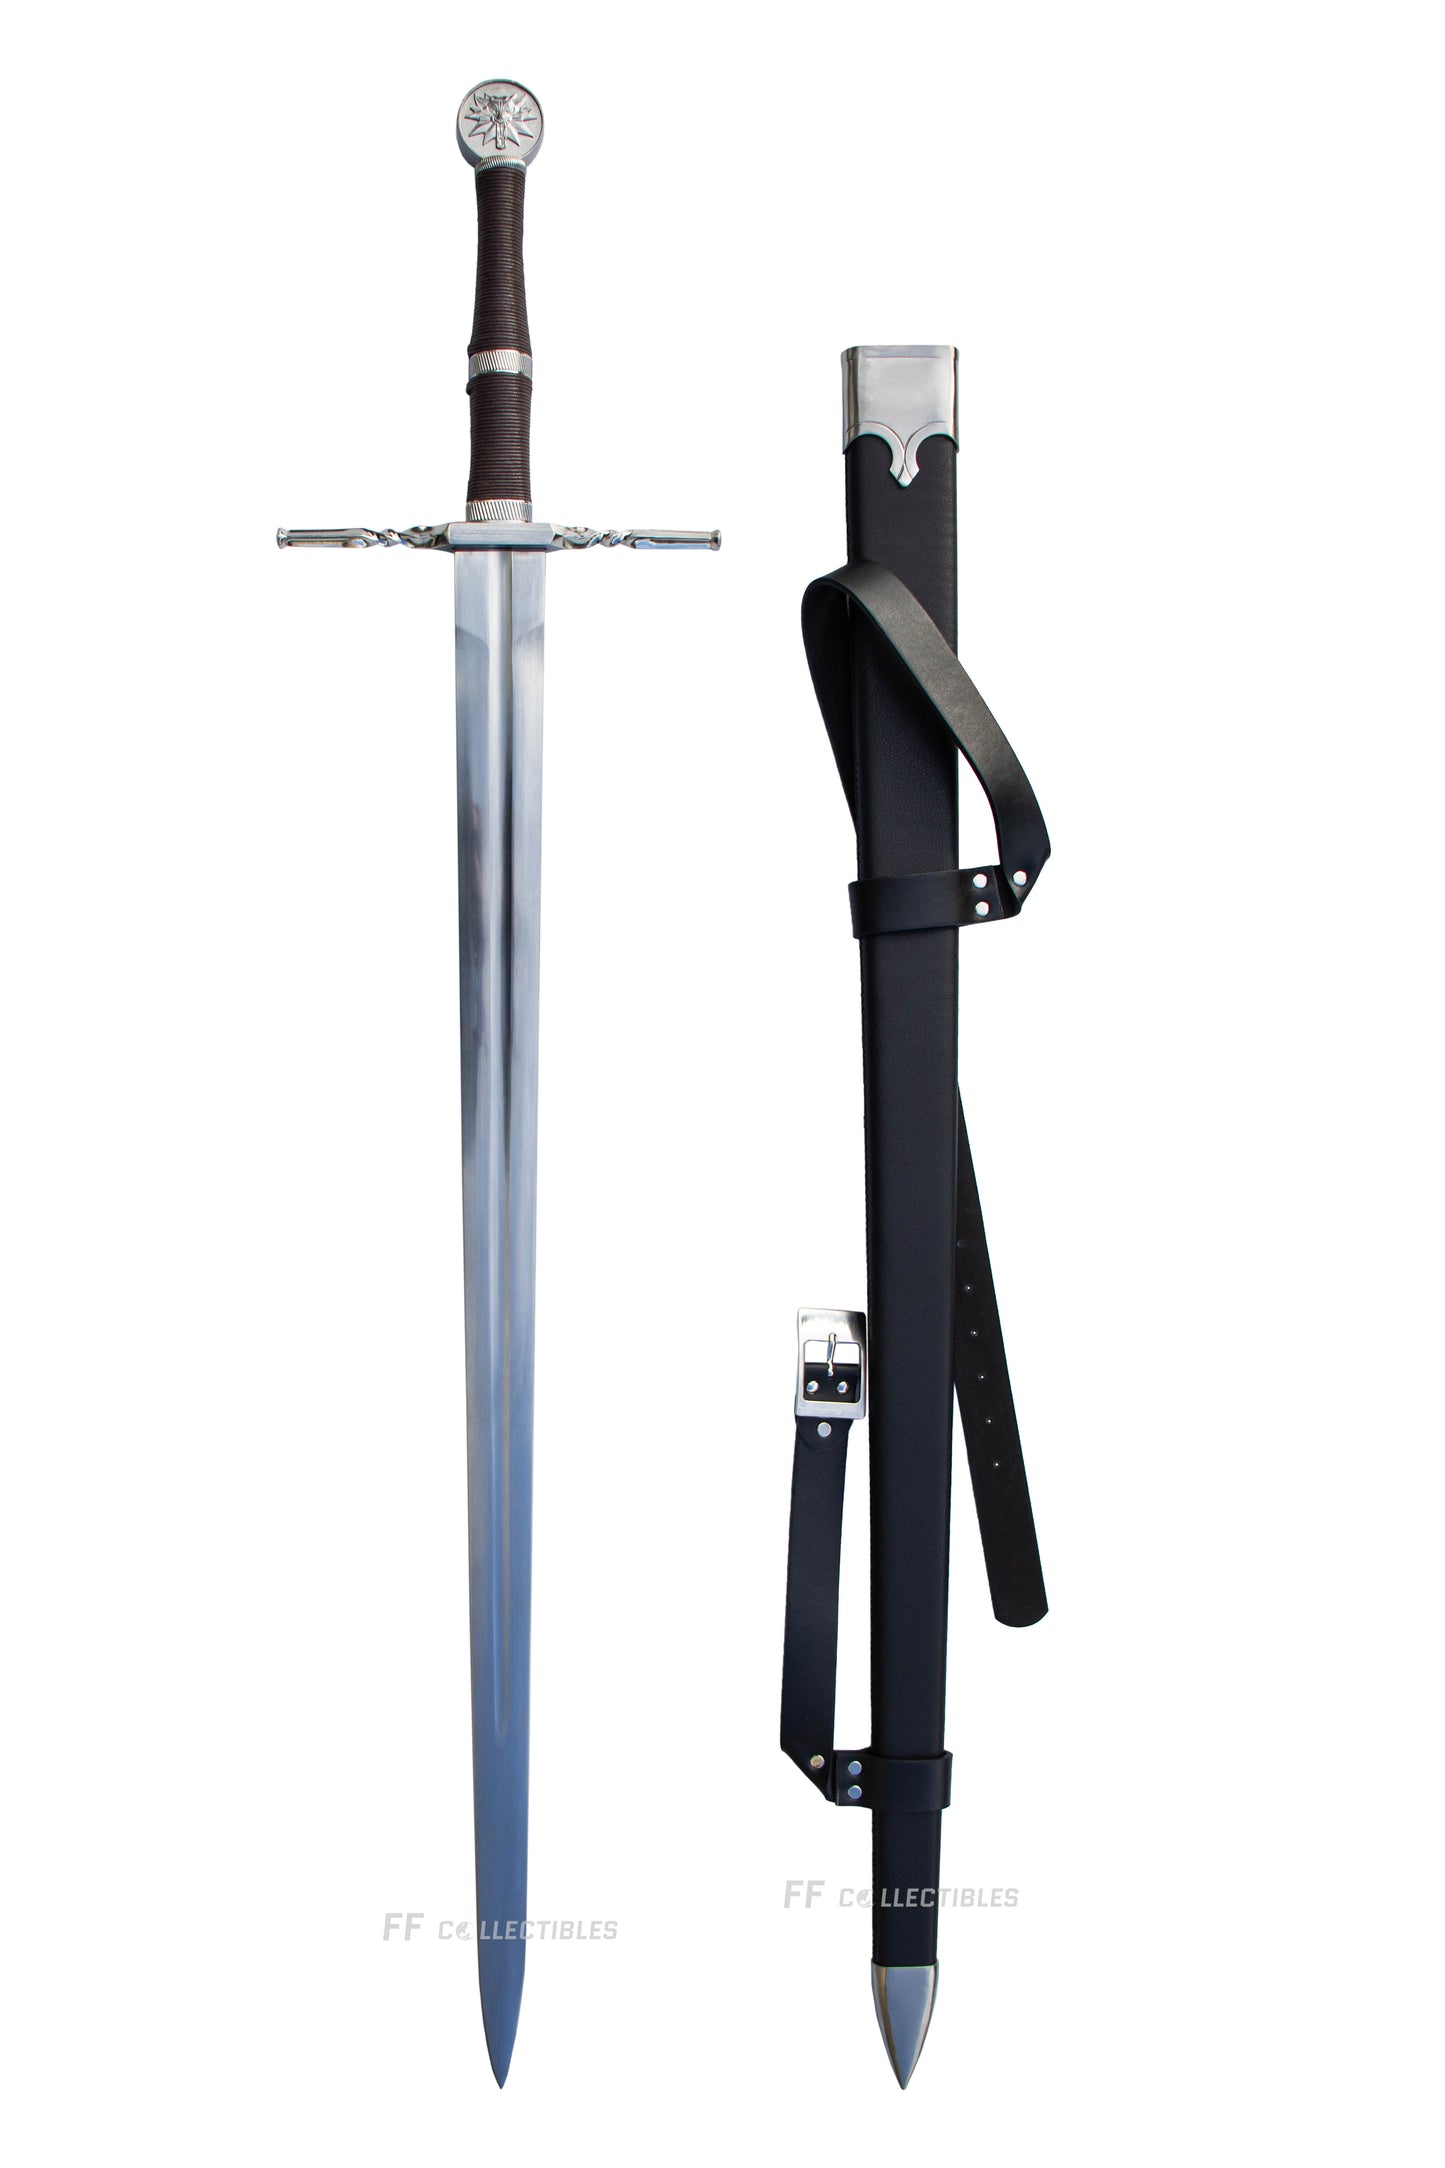 THE WITCHER - GERALT OF RIVIA'S SUPERIOR WOLVEN STEEL SWORD